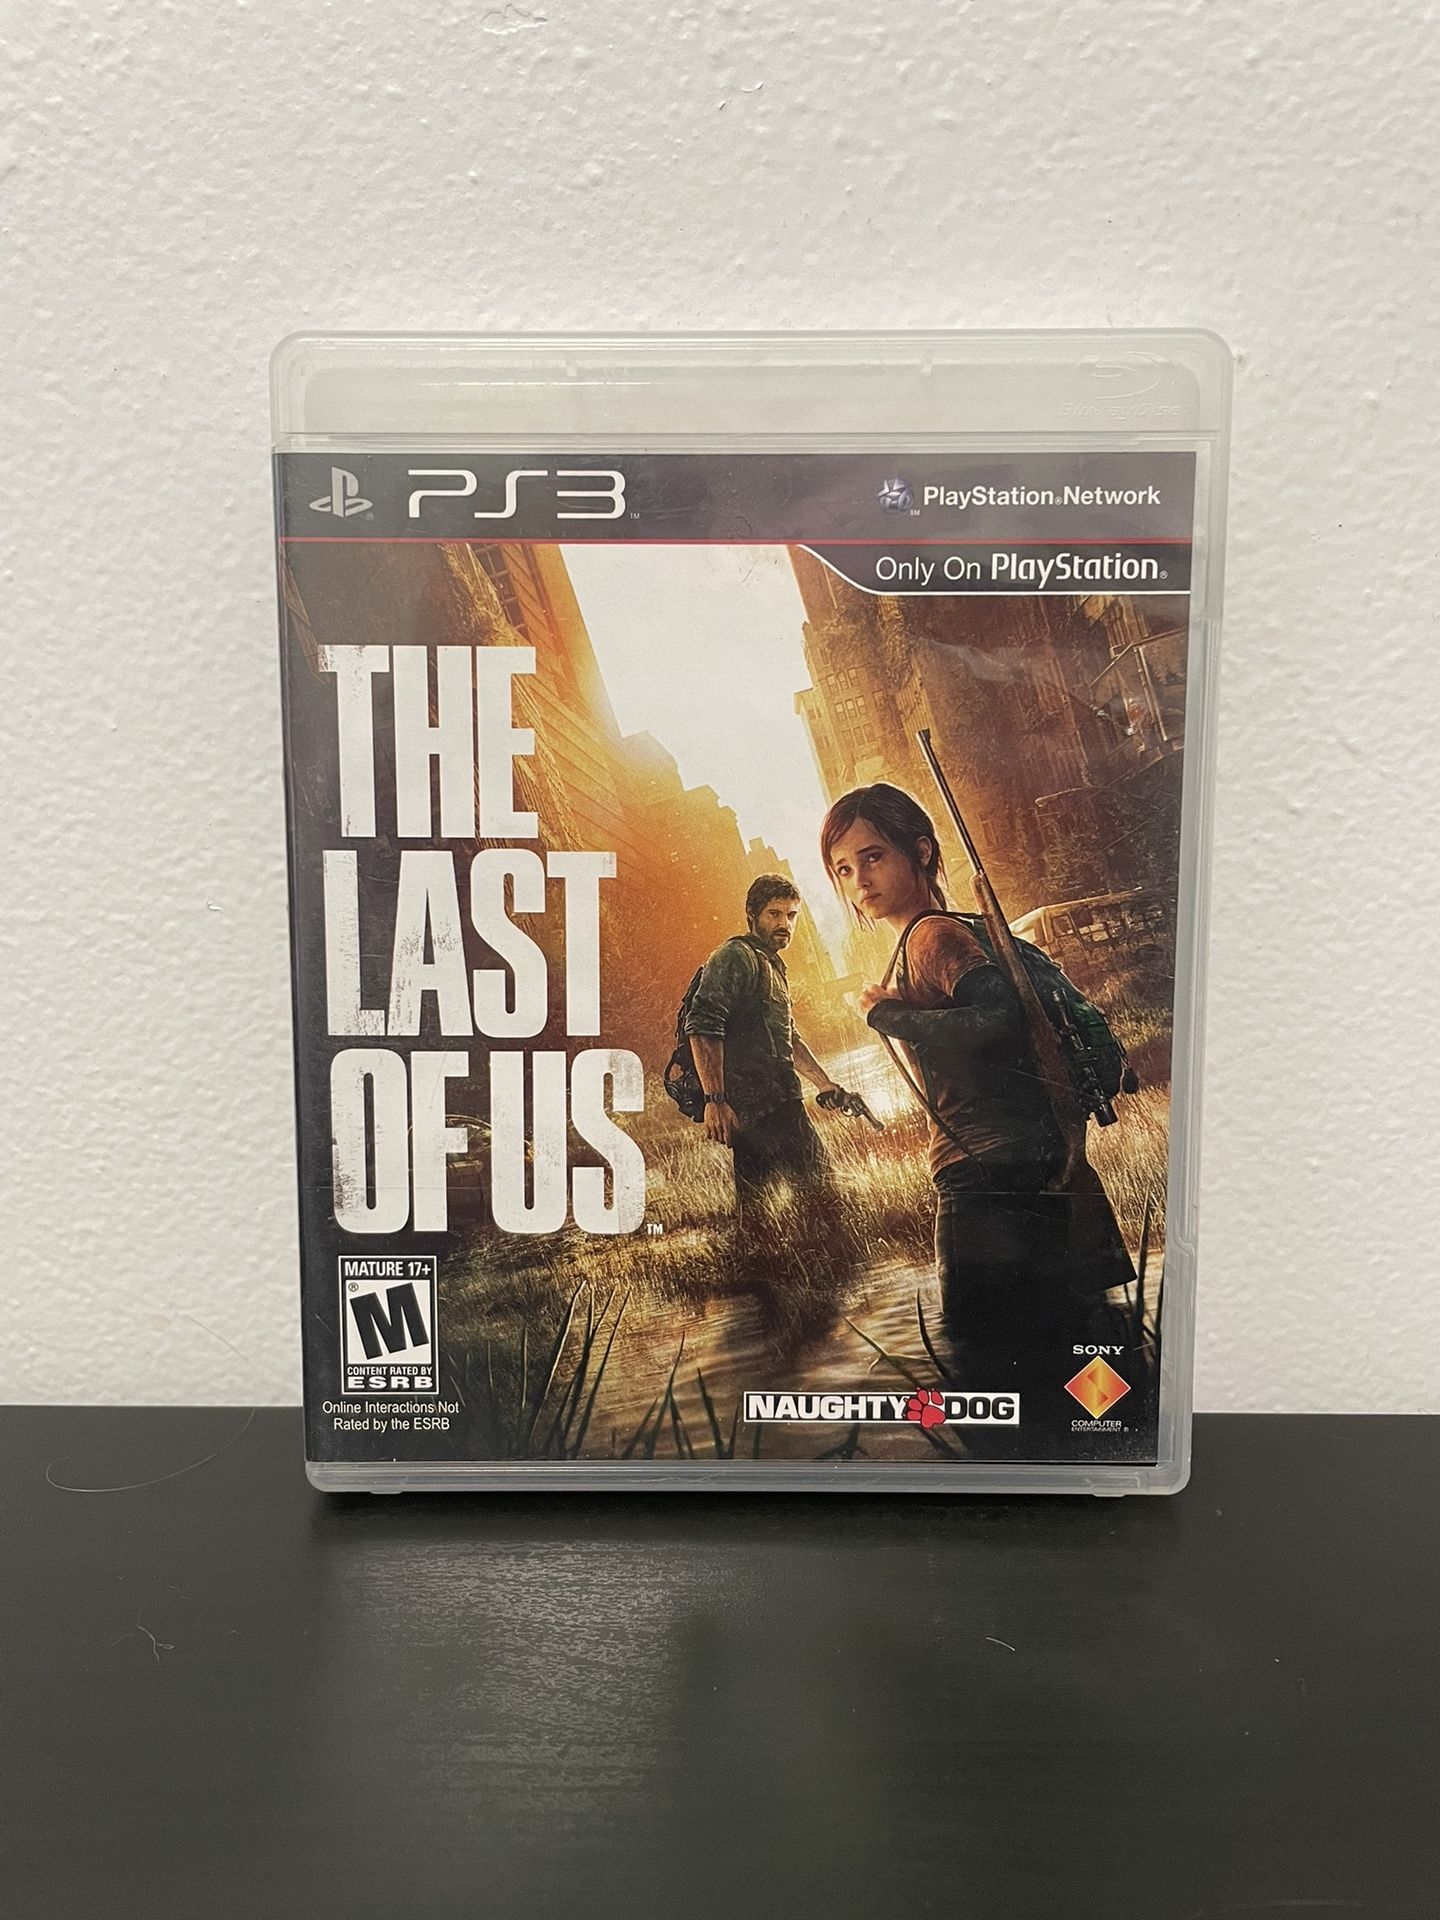 The Last Of Us PS3 CIB w/ Stickers Like New Sony PlayStation 3 Video Game Zombie